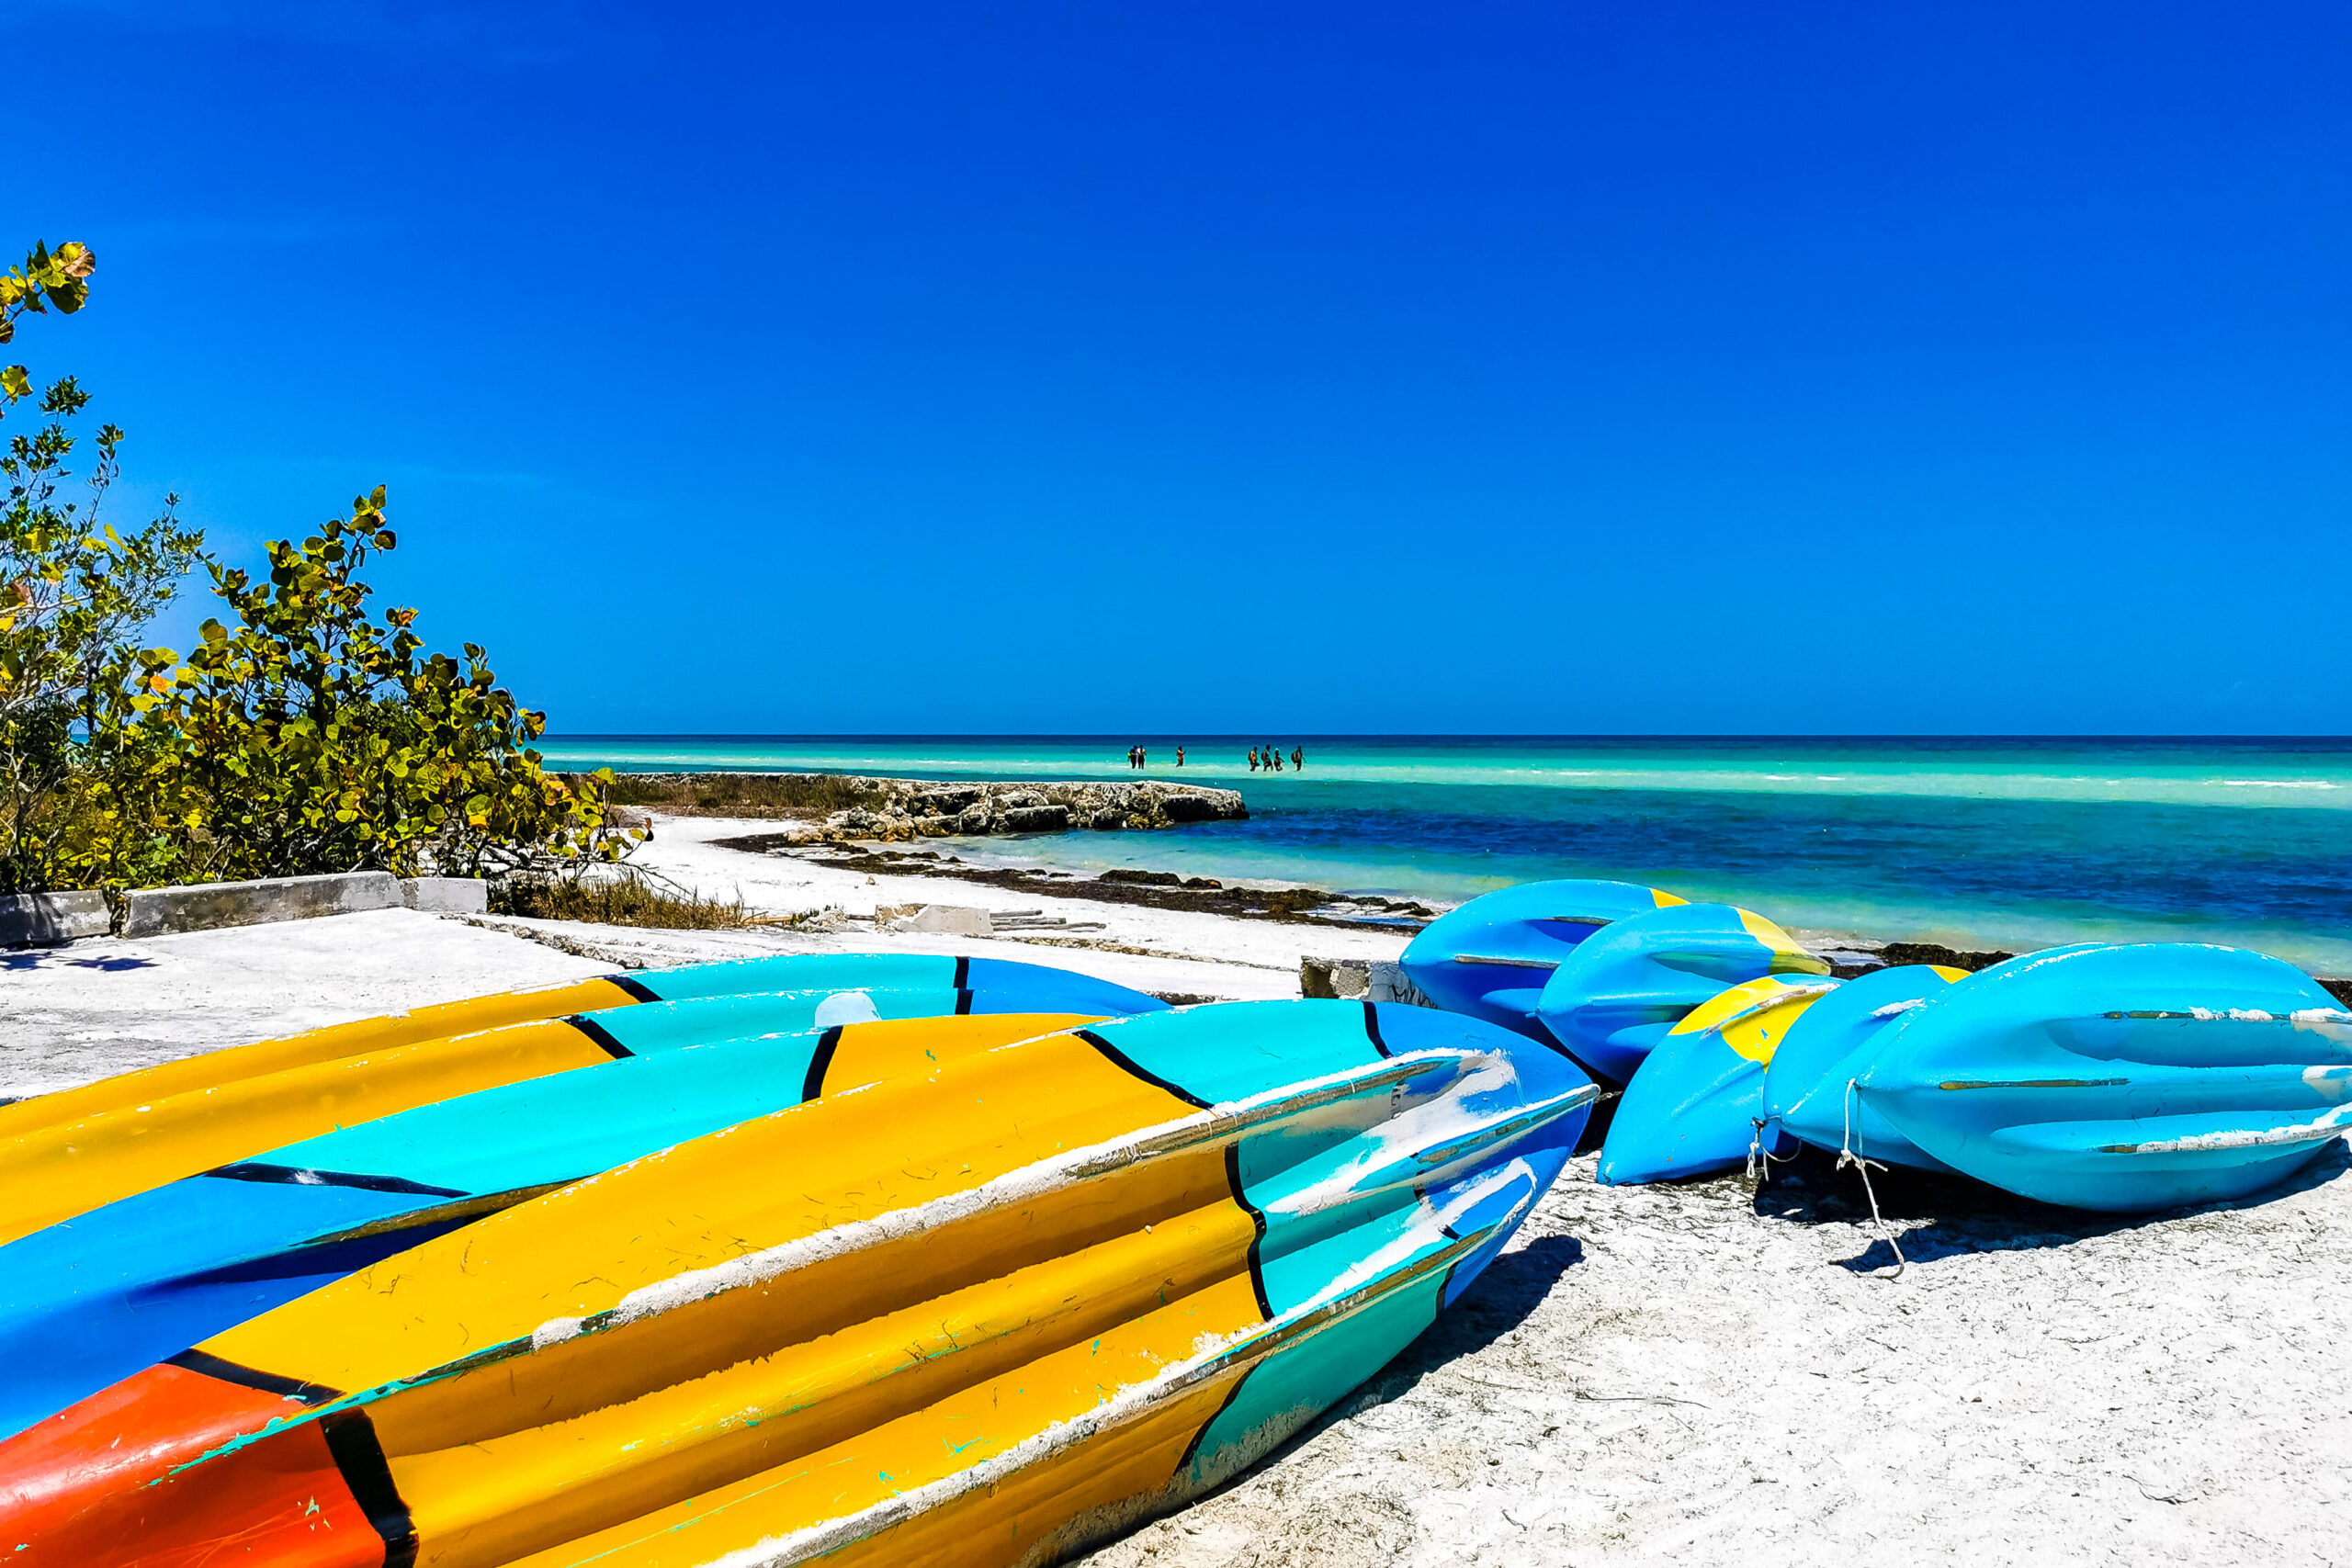 Colorful canoes pulled up on the beach in Holbox, Mexico